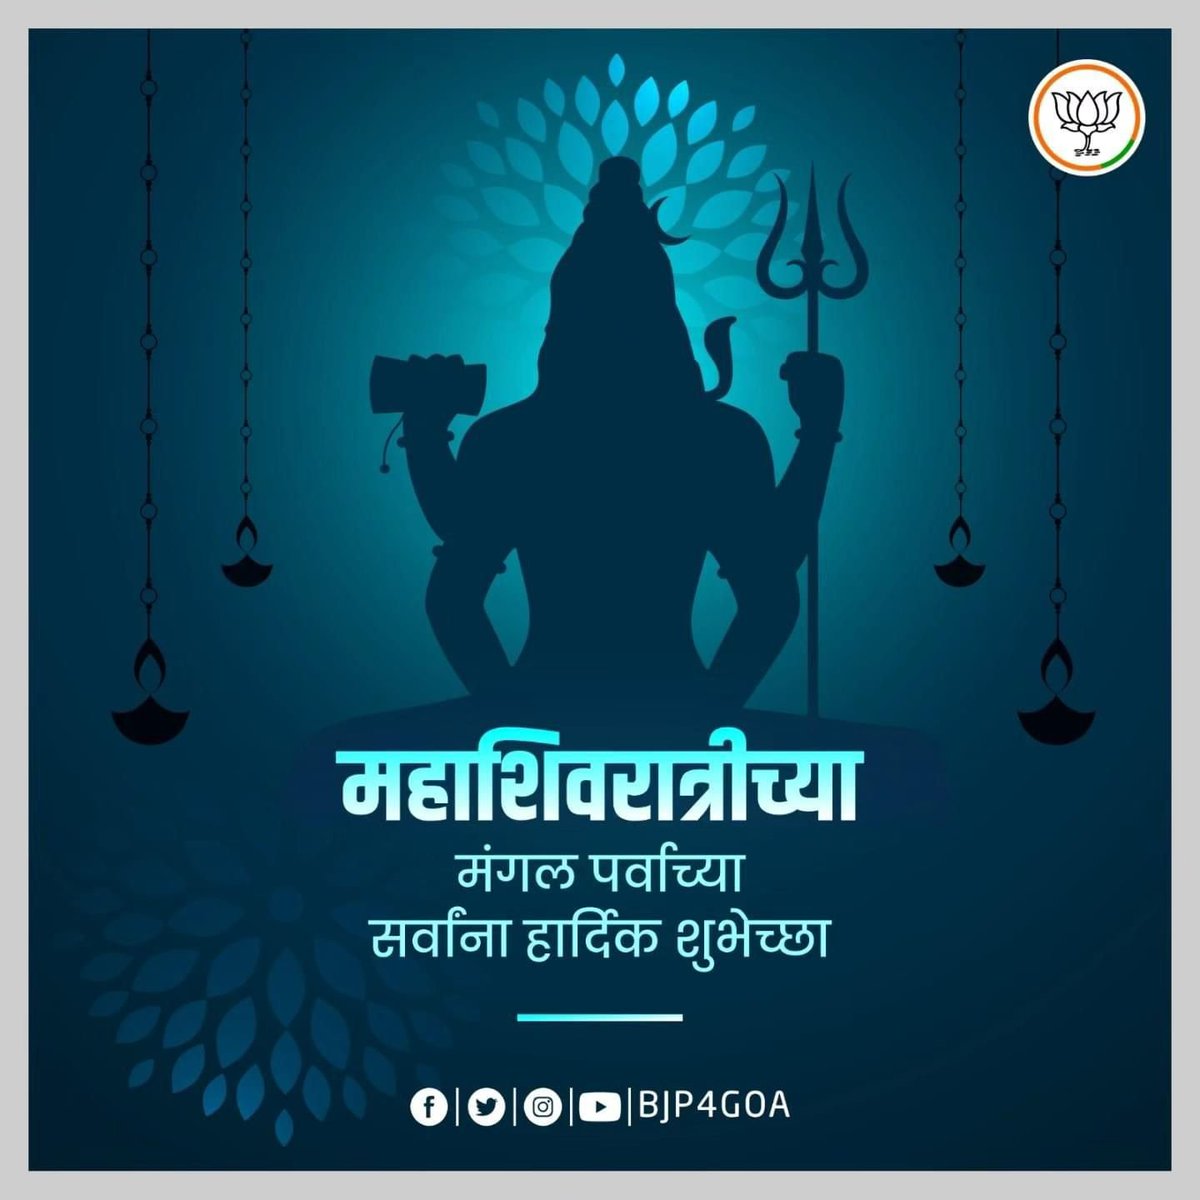 Wishing our #NariShakti a #HappyWomensDay. Let us seek the blessings of #LordShiva on this auspicious occasion of #Mahashivratri2024!! #Mahashivratri #Mahashivaratri2024 #Mahadev #shivratri #WomenEmpowerment #WomensDay